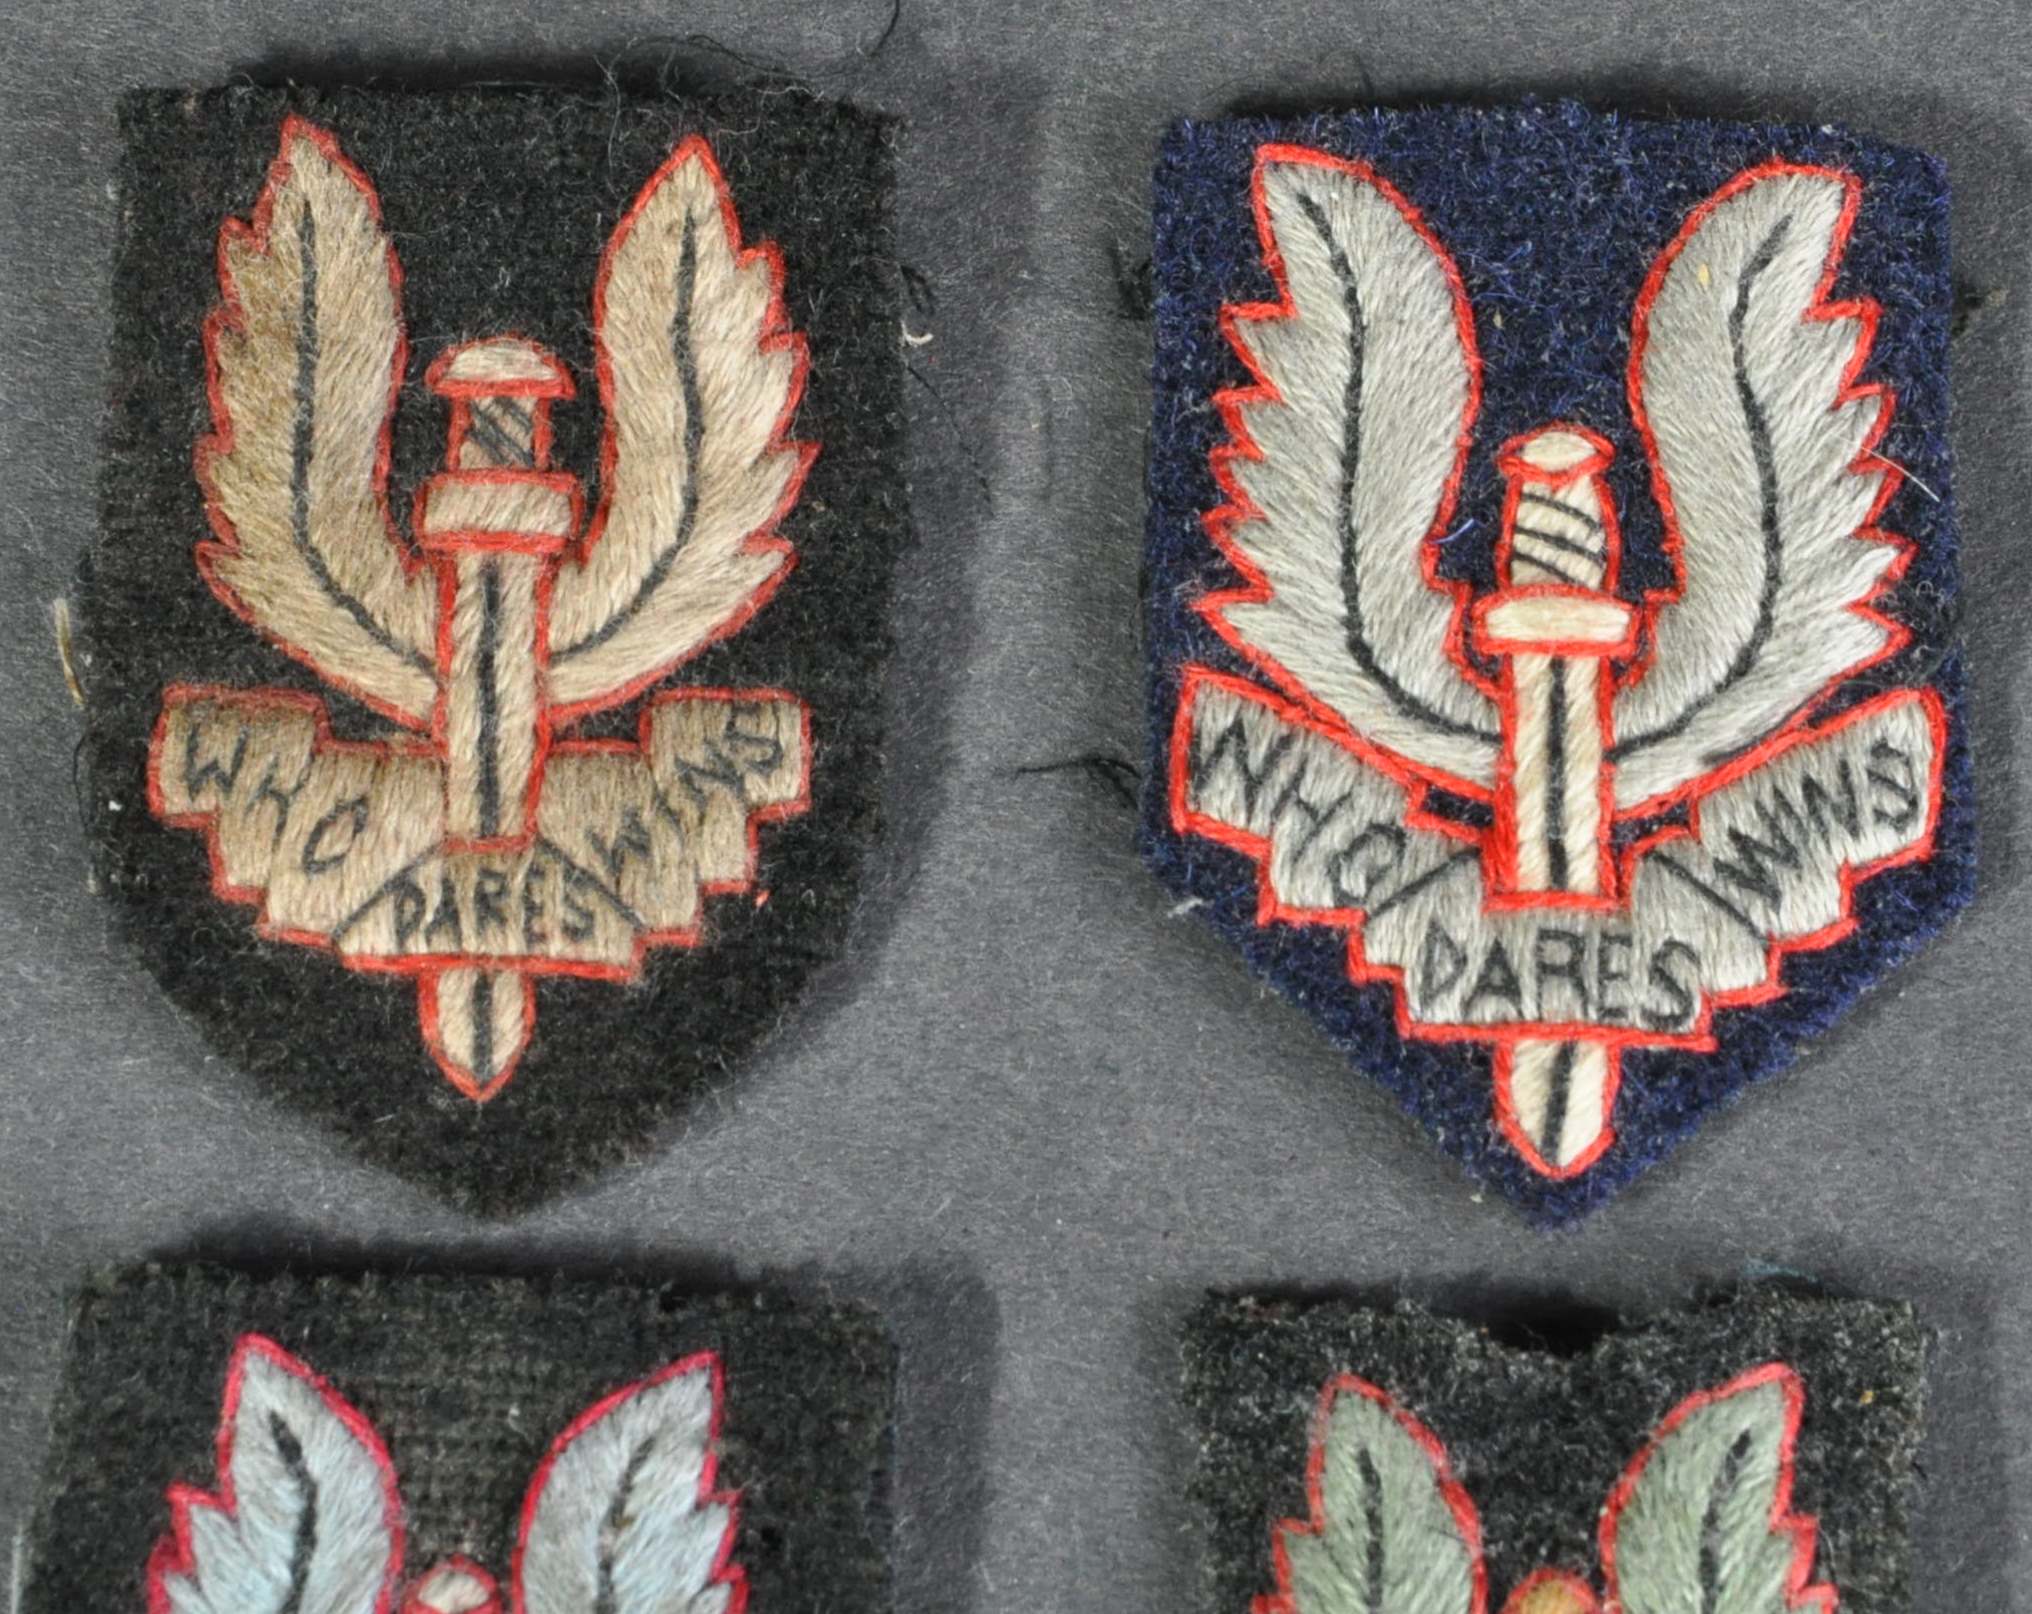 COLLECTION OF WWII SECOND WORLD WAR TYPE SAS PATCHES - Image 3 of 3